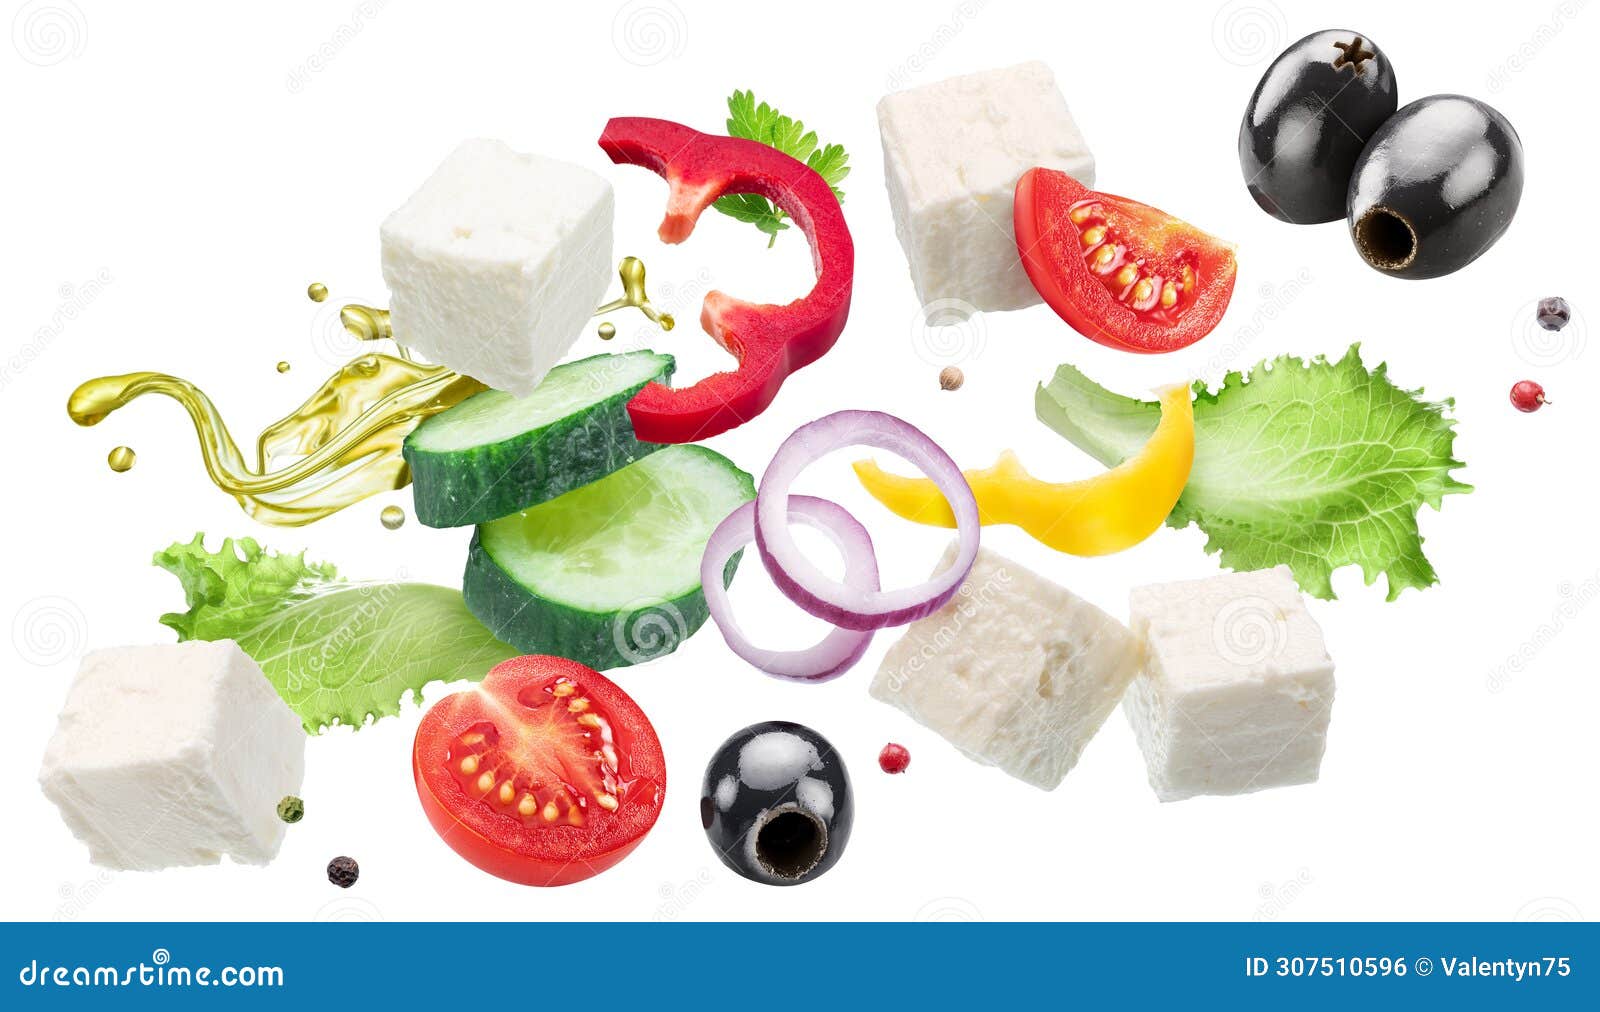 greek salad ingredients flying in air. file contains clipping paths